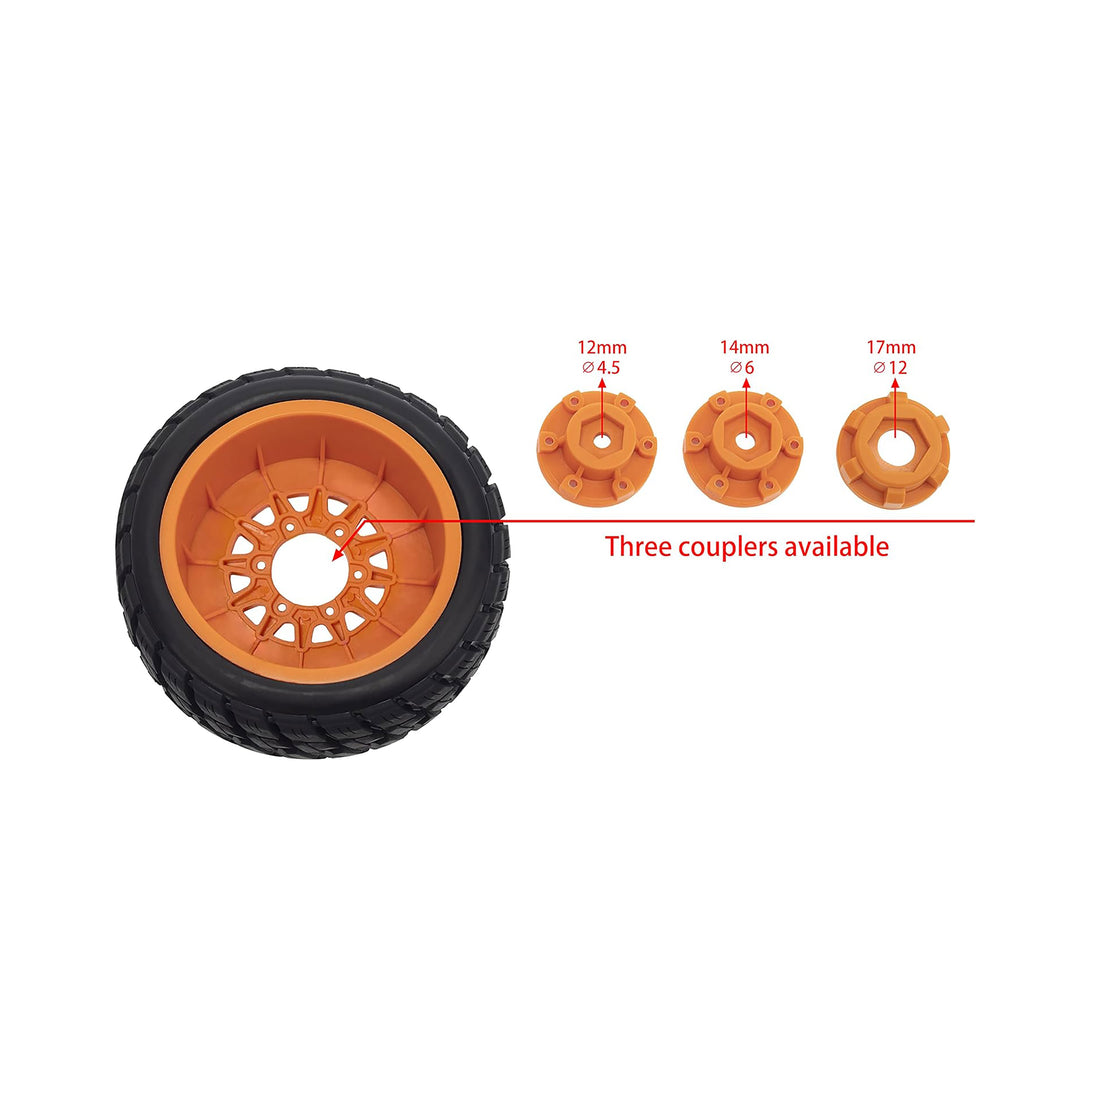 A-Orange RC Truck Buggy Rubber Tires